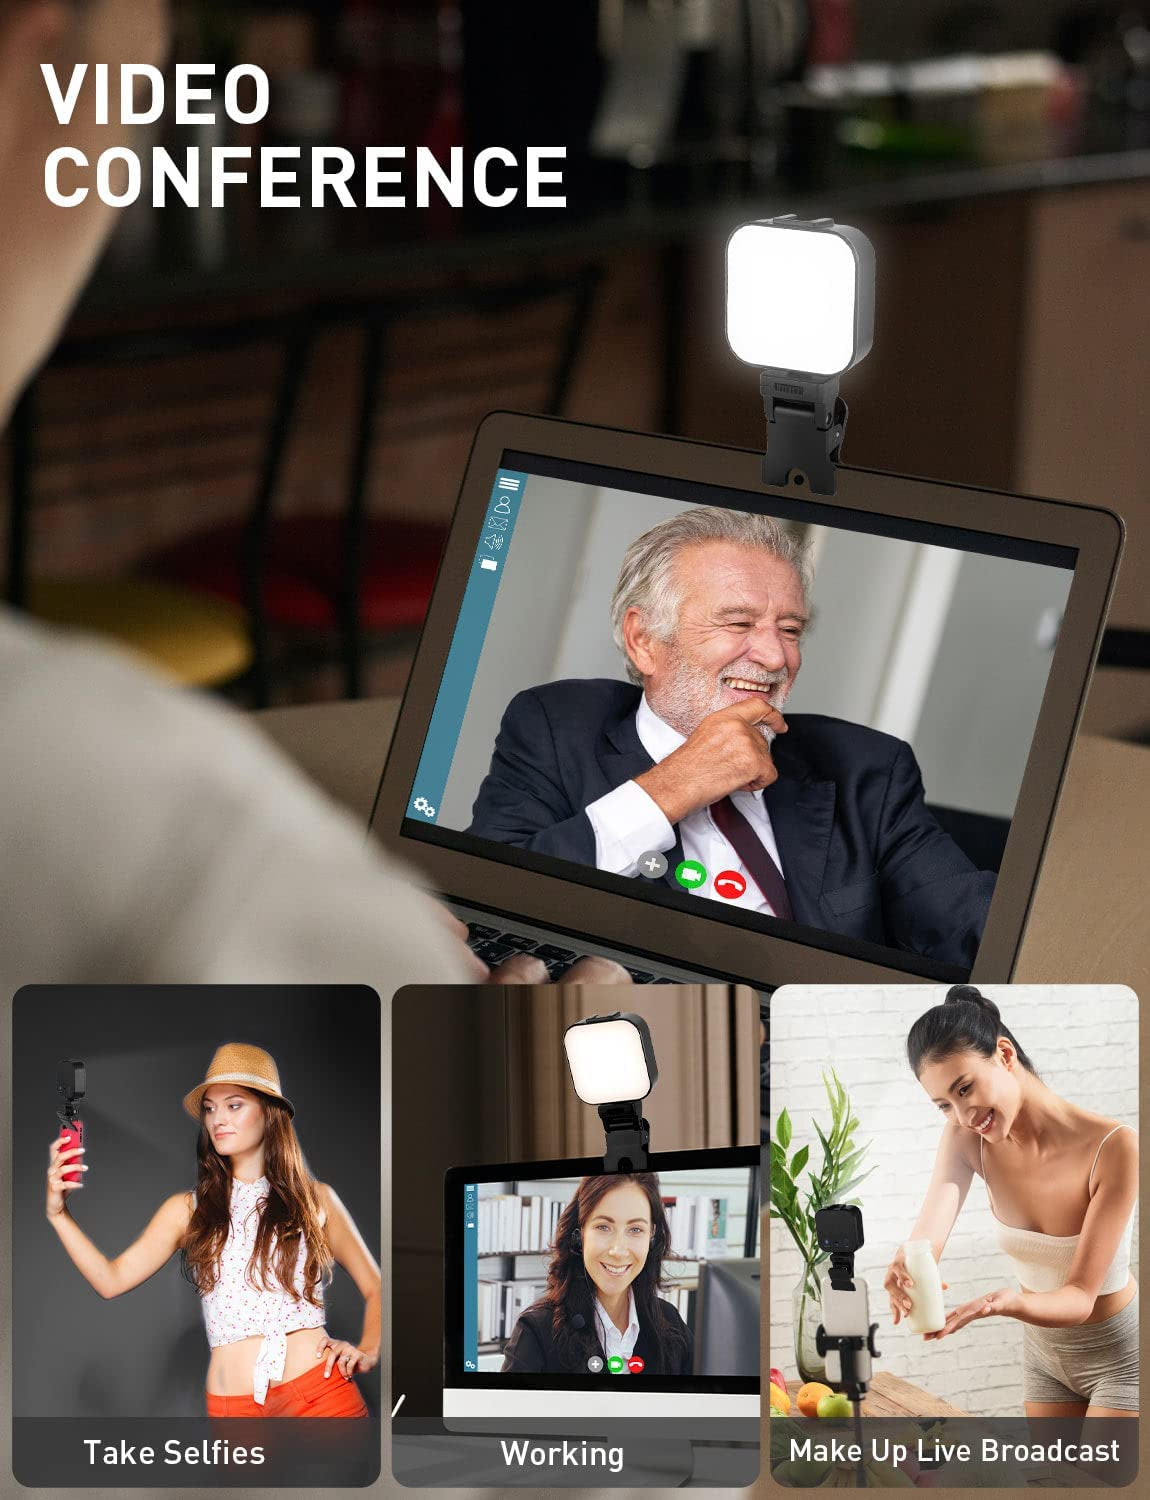 Portable 64 LED Rechargeable Selfie Light - 5 Lighting Modes - Clip-on Fill Lights for iPhone, Cell Phone, Laptop, TikTok, Selfie, Video Conference, Camera